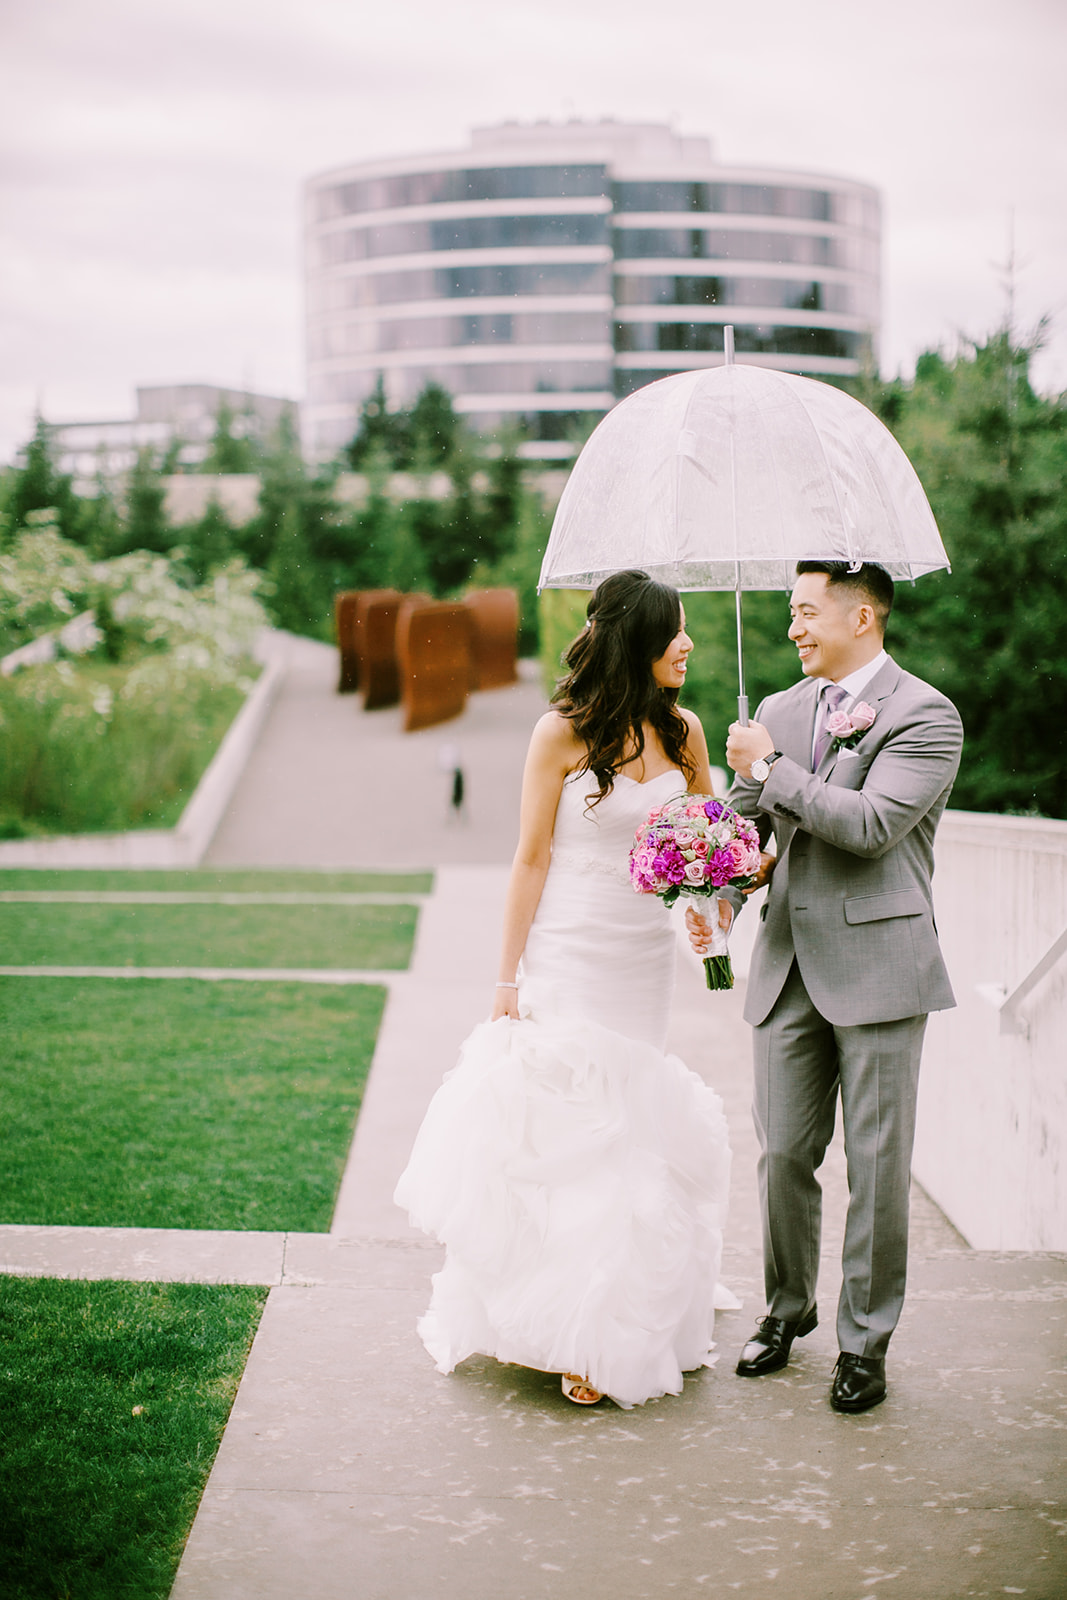 Wedding portraits at Olympic Sculpture Park